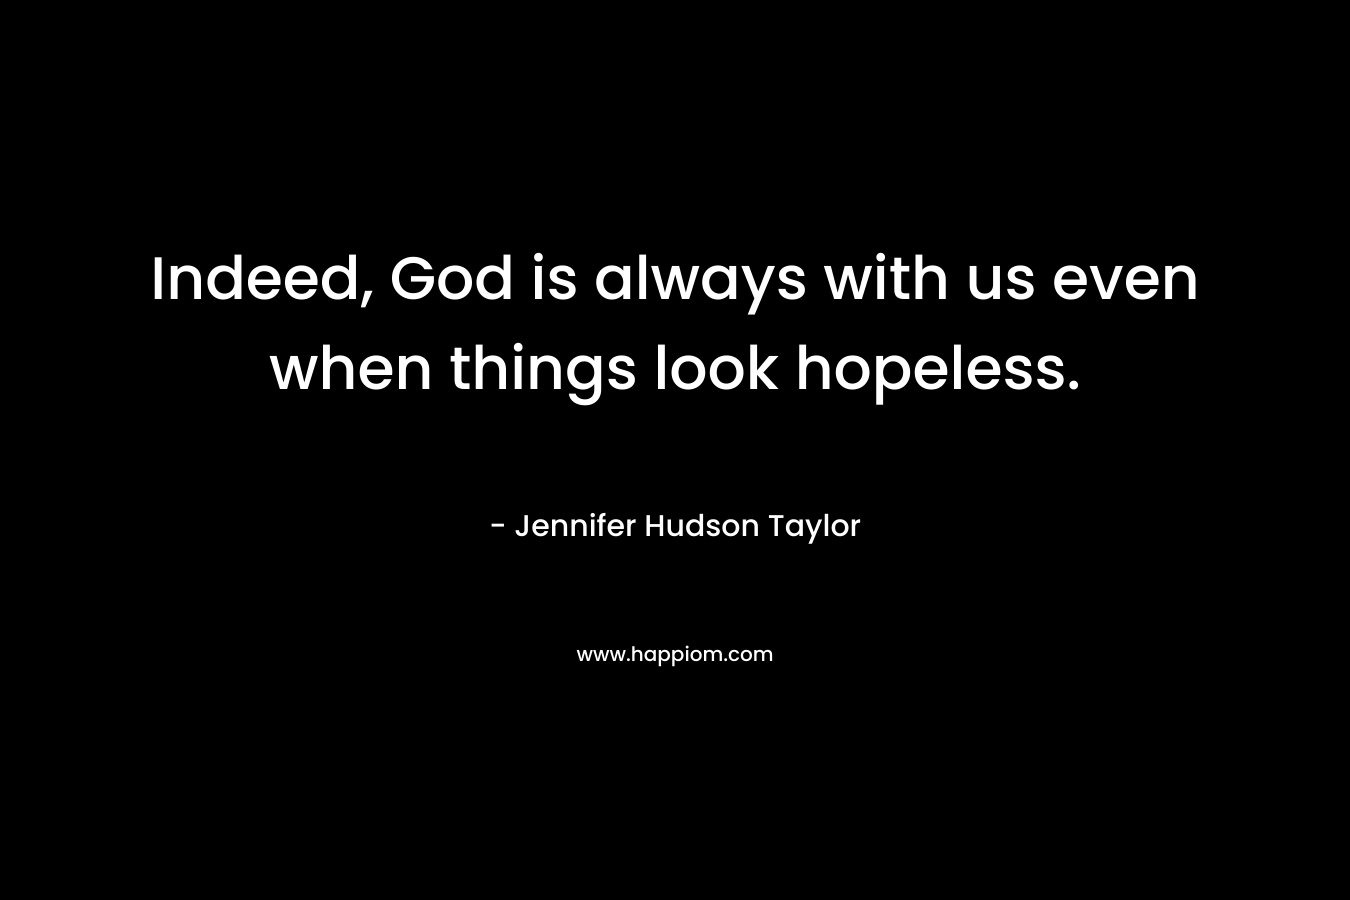 Indeed, God is always with us even when things look hopeless. – Jennifer Hudson Taylor